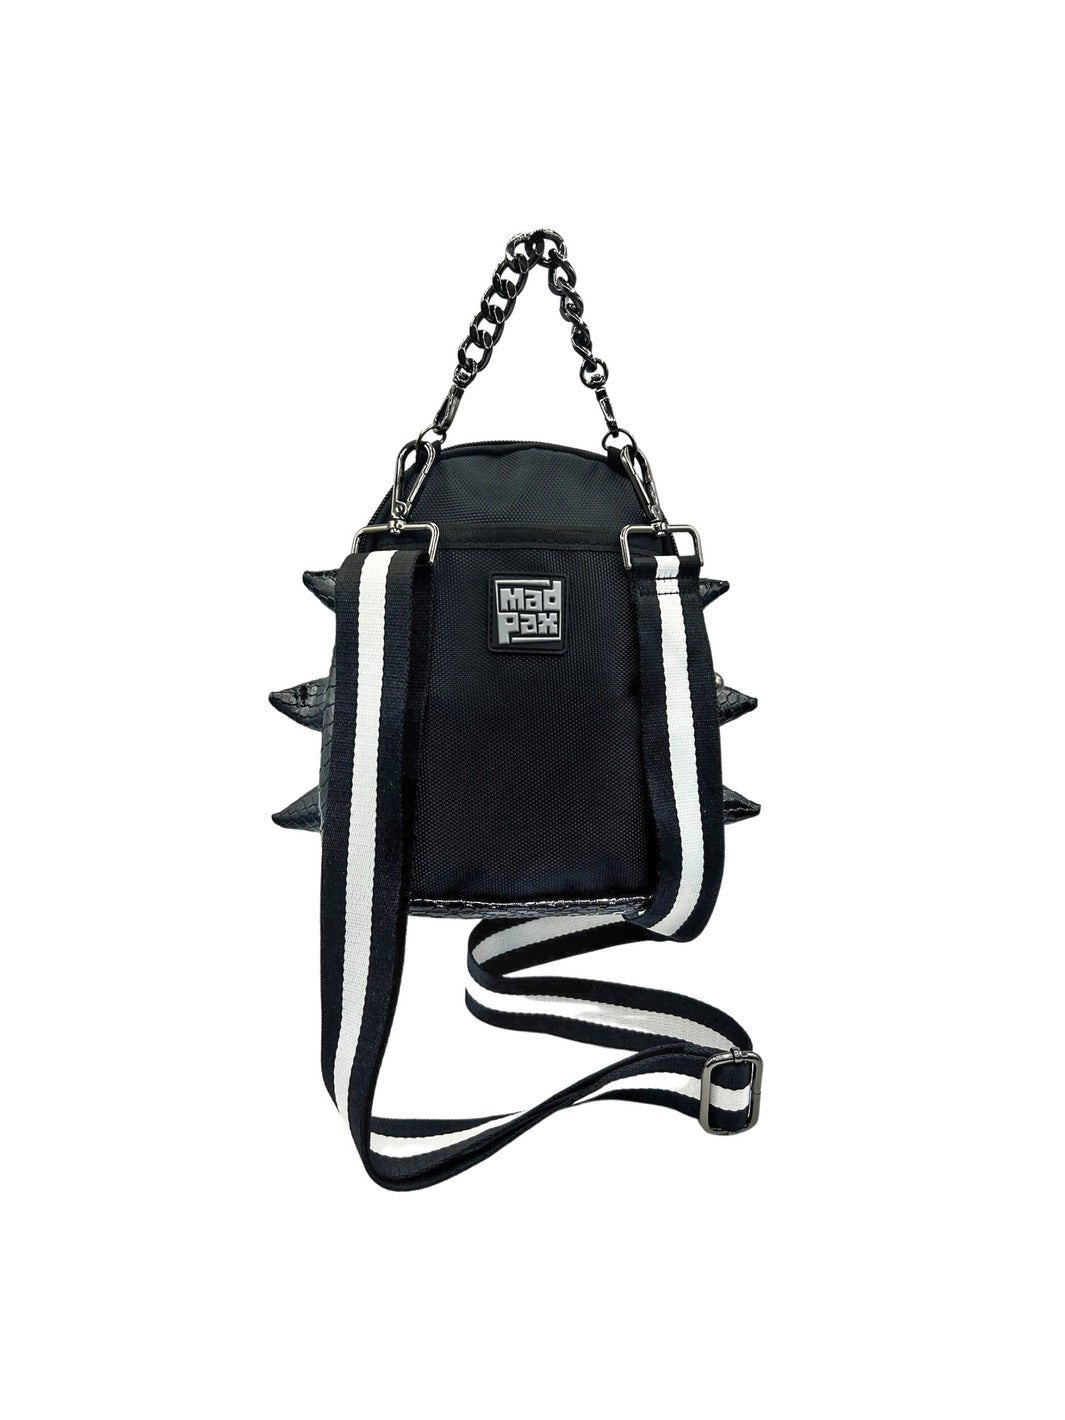 Black Out - black crossbody bag wtih spikes - Madpax